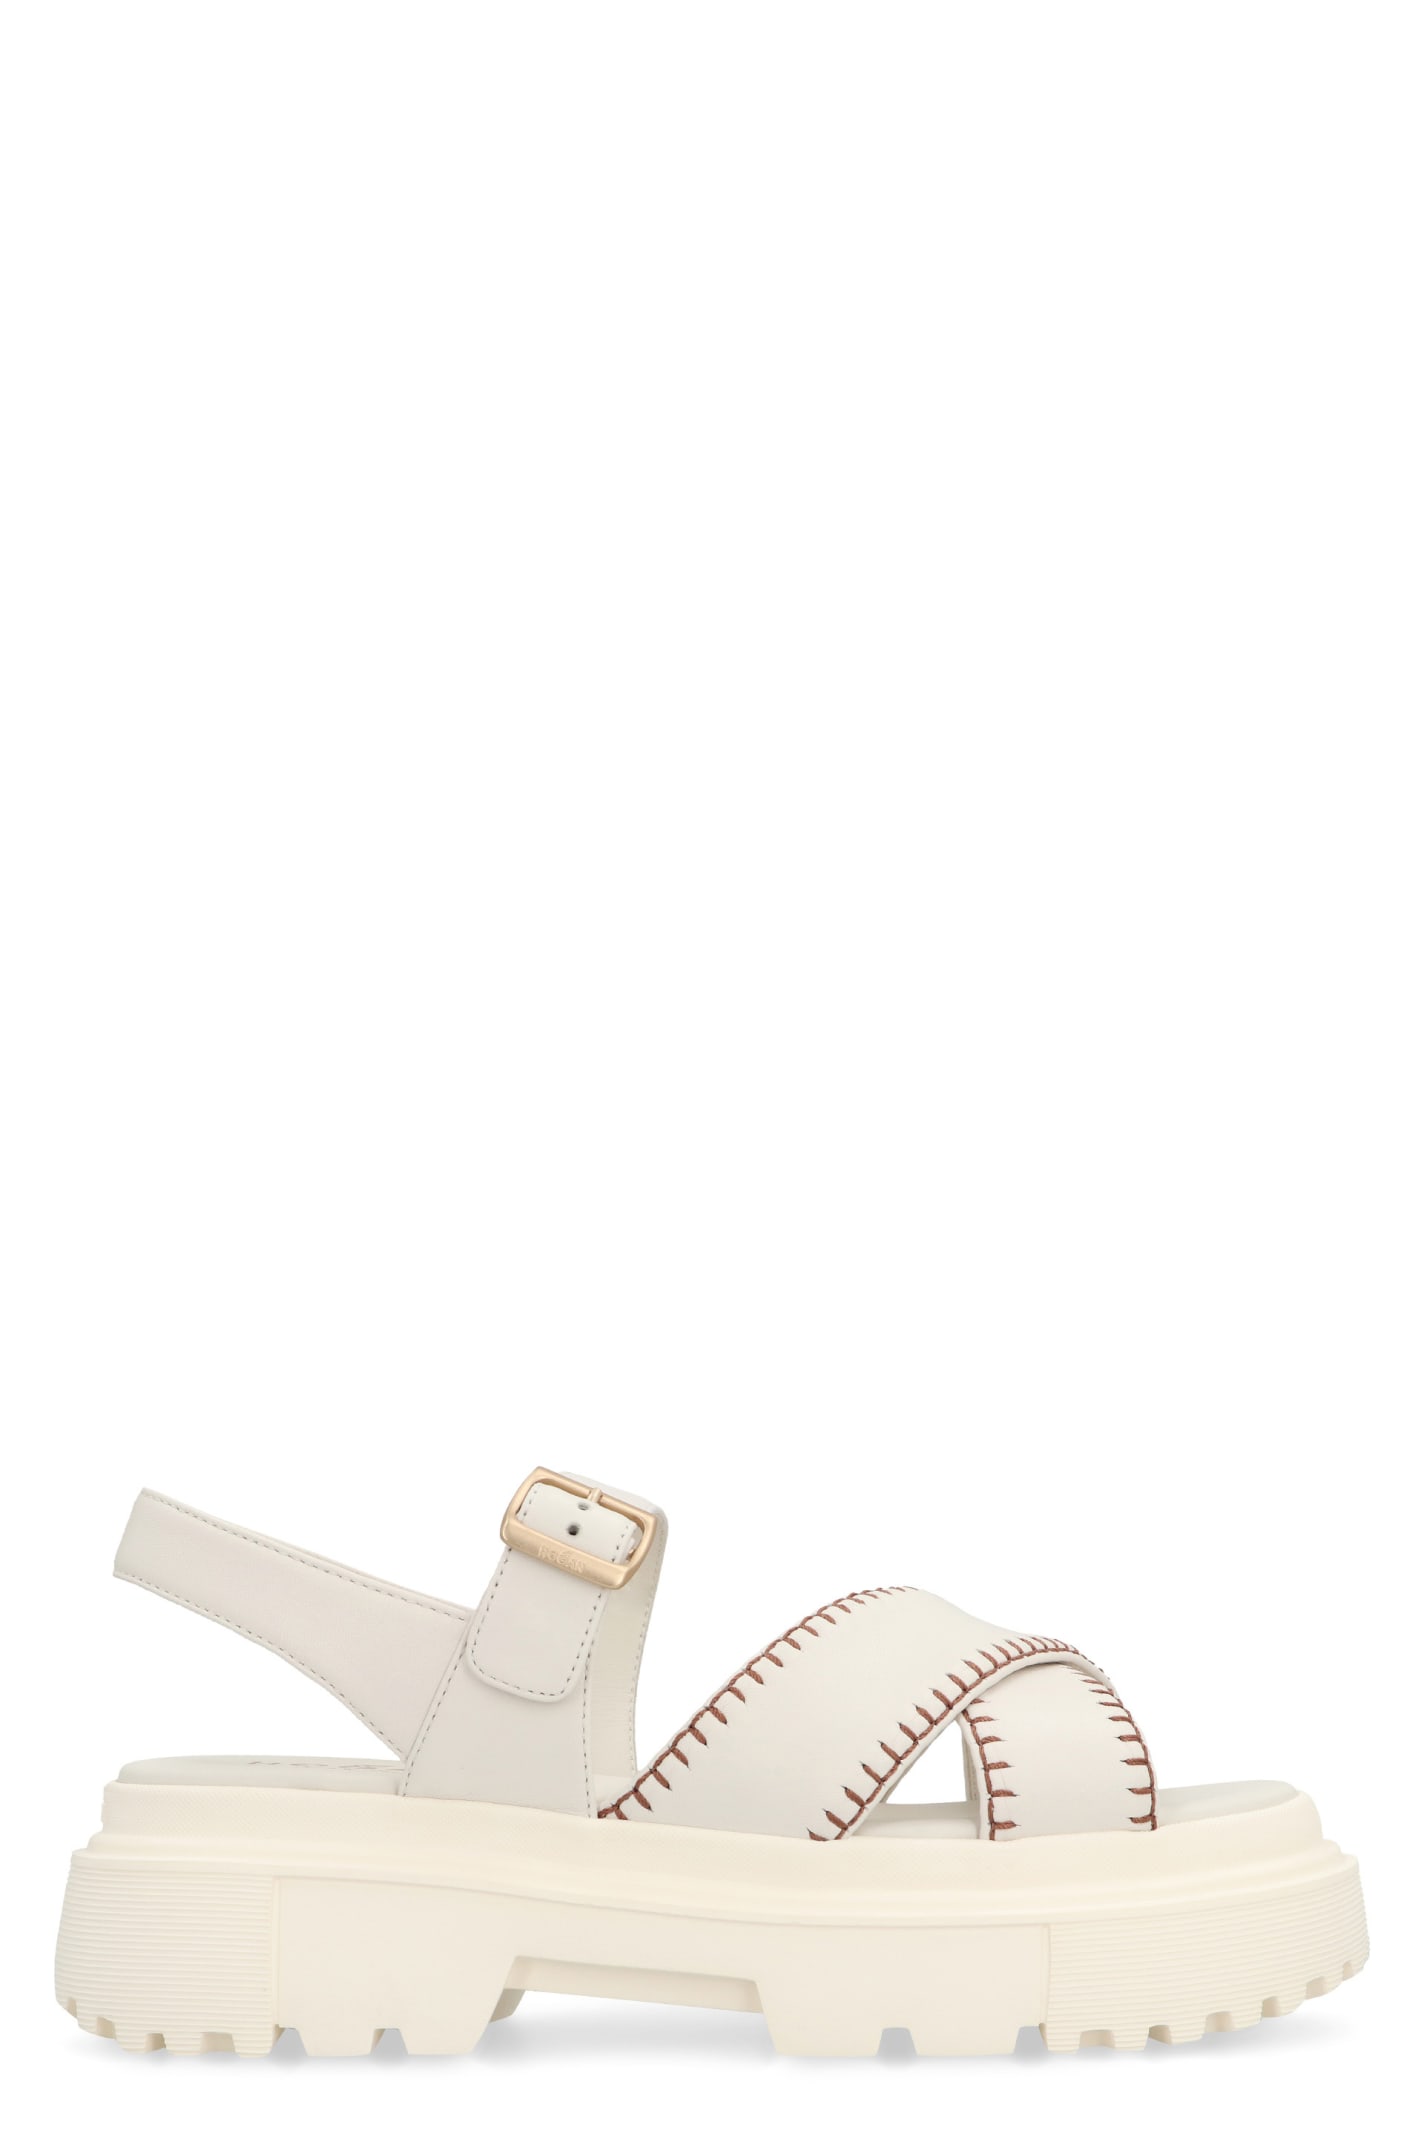 Shop Hogan Leather Sandals In Ivory